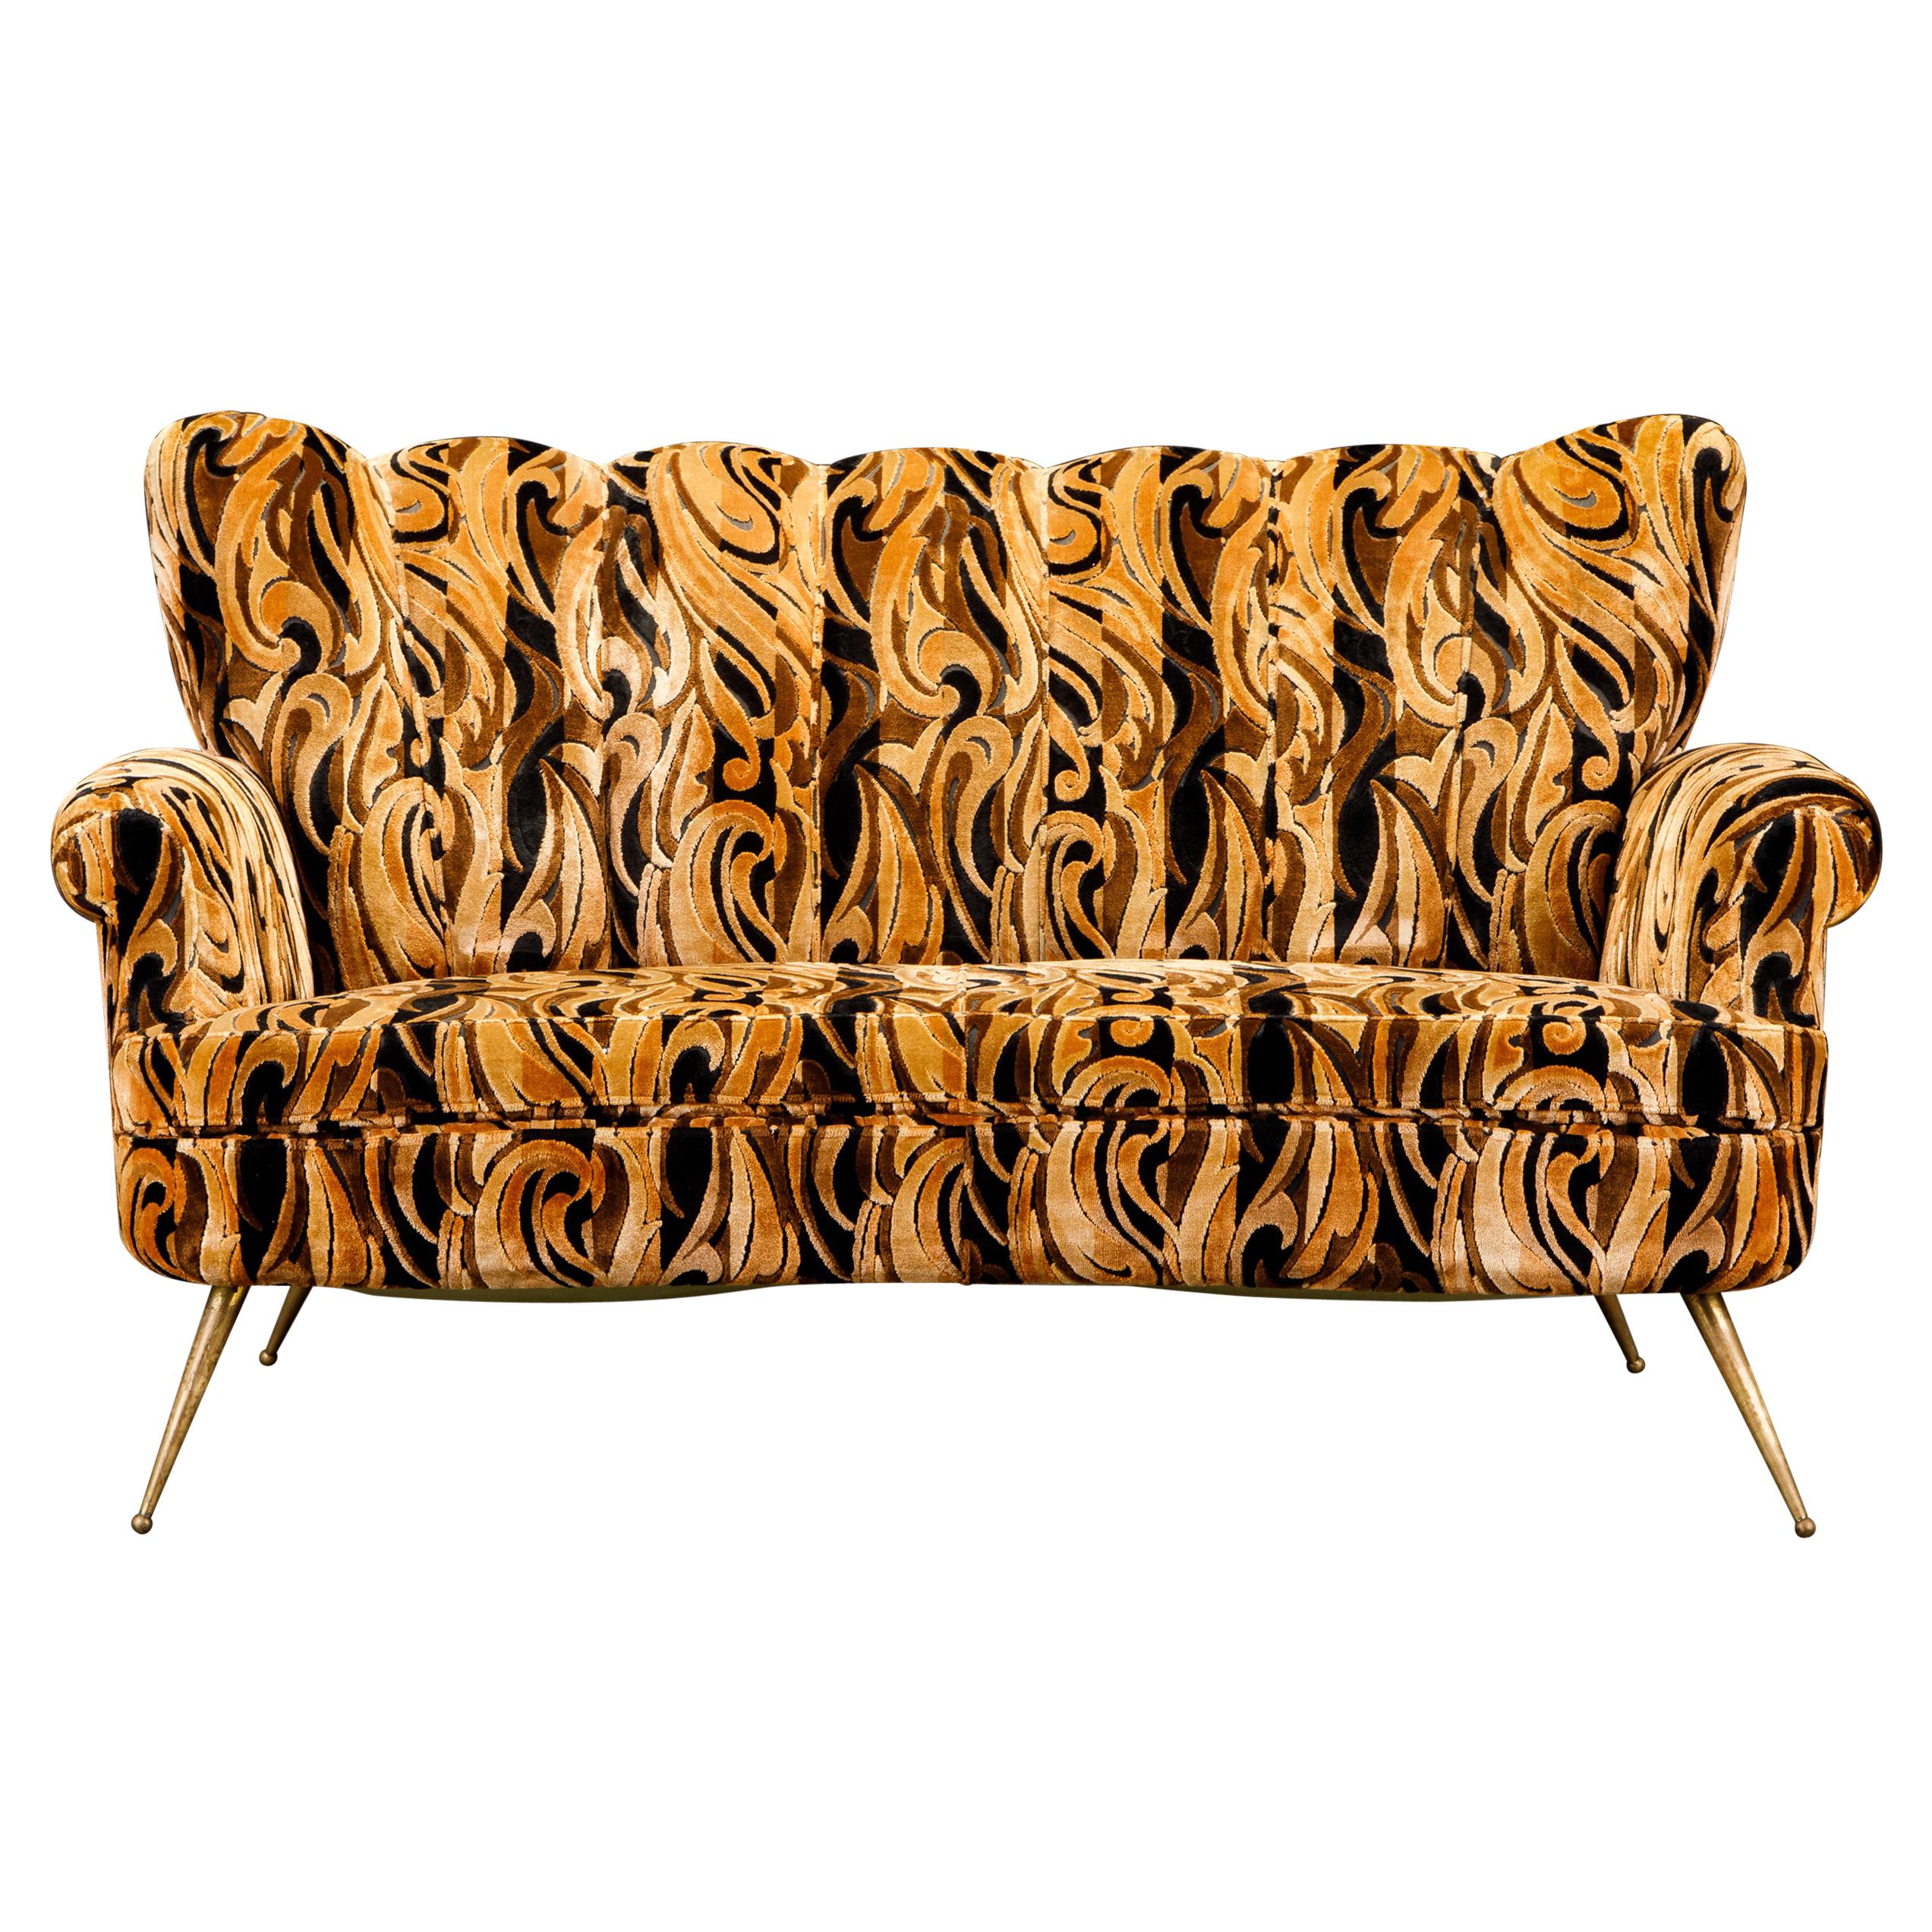 Italian Channel Tufted Curved Sofa in Cut Velvet with Brass Legs, 1950s